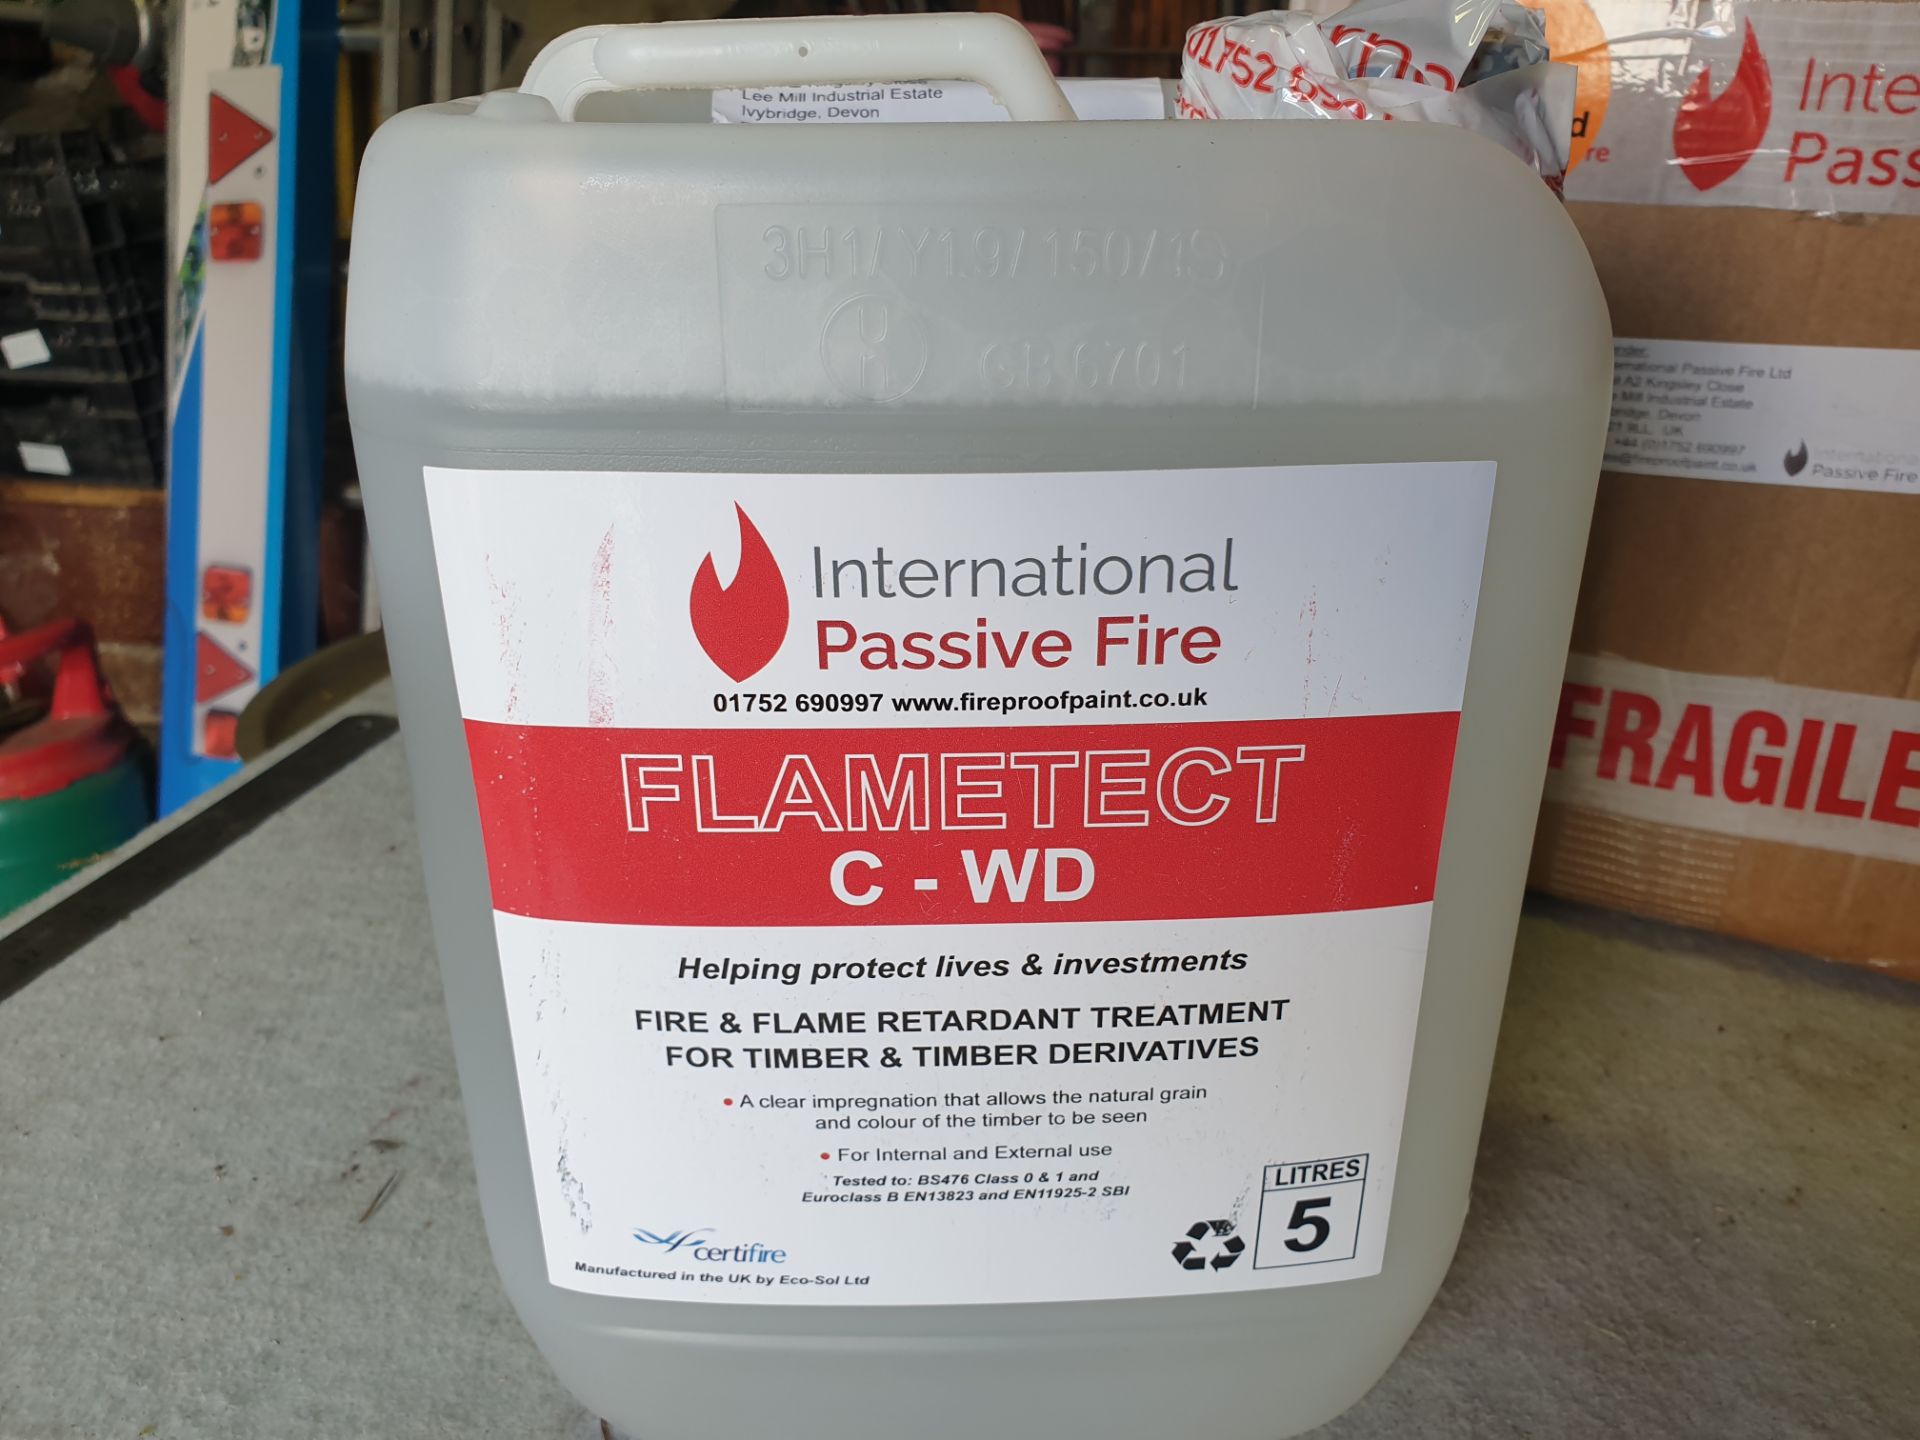 1 x 5ltr Flametech Fire and flame retardant for timber and timber derivatives - bought in Dec 2019